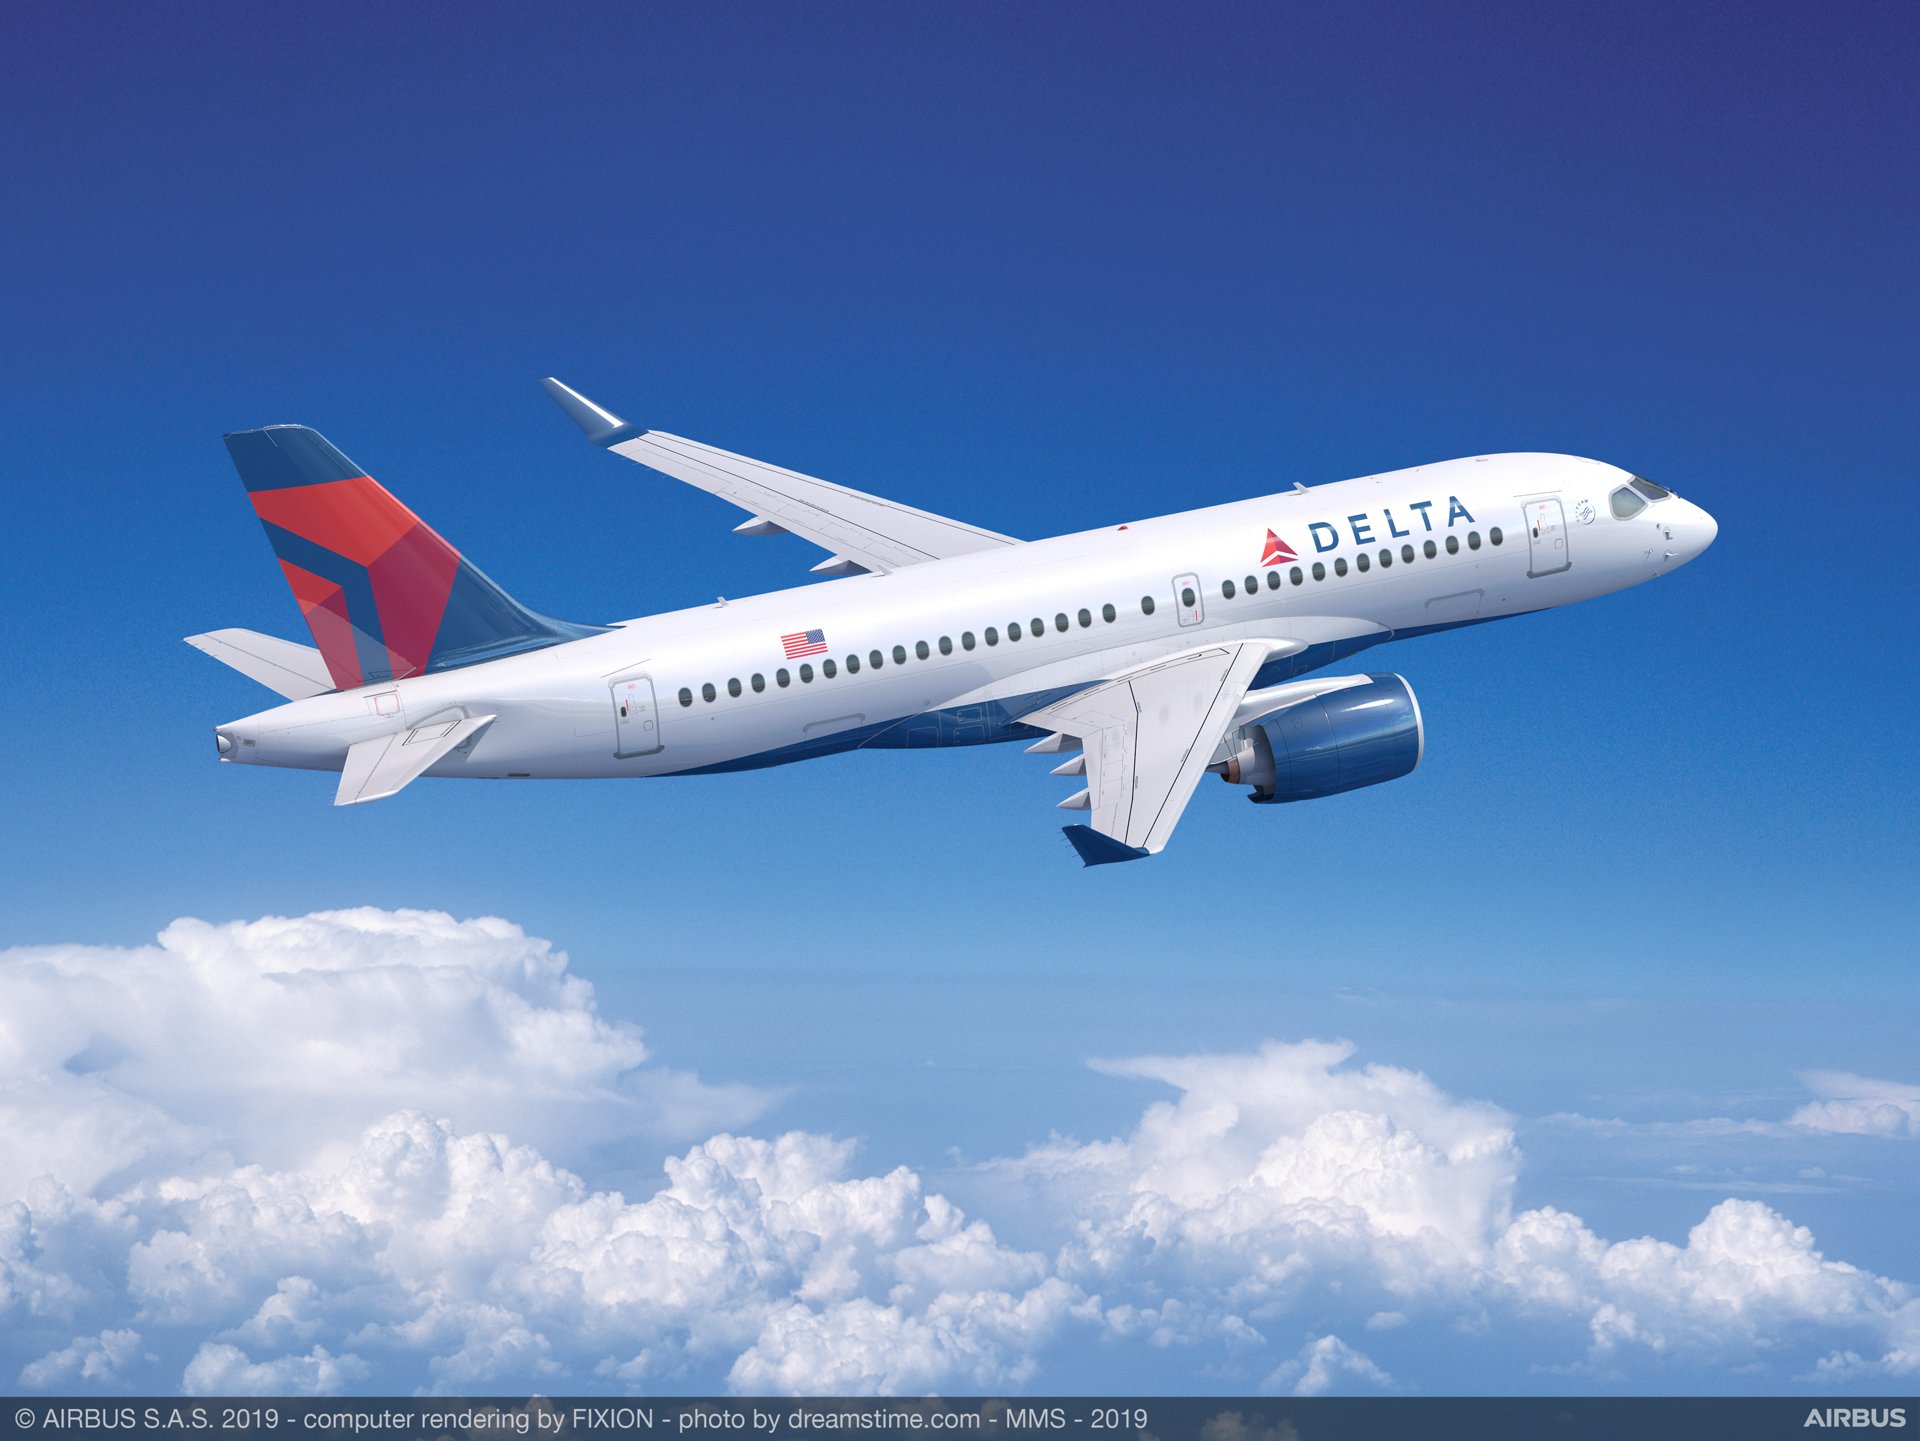 Delta Air Lines Books Order For Additional Five Airbus A220